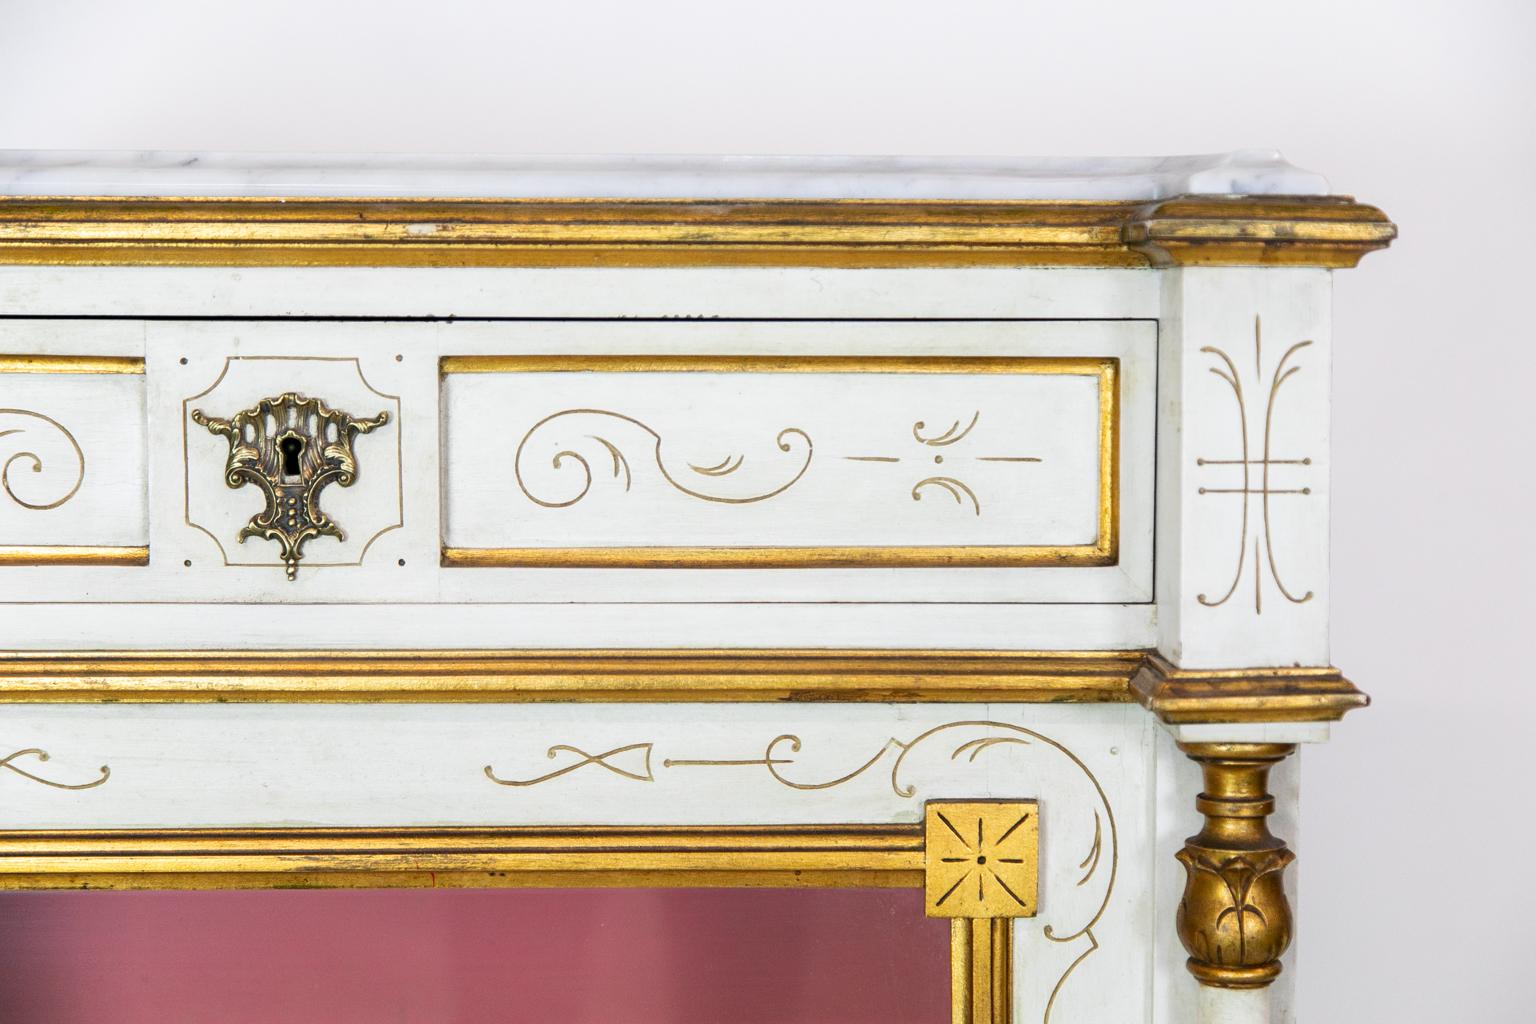 This display case has an ogee shaped Carrera marble top framed by gold molding. The frieze has two recessed panels with incised gold stylized arabesques. The front stiles have two support fluted columns that have carved tops and bases. The front